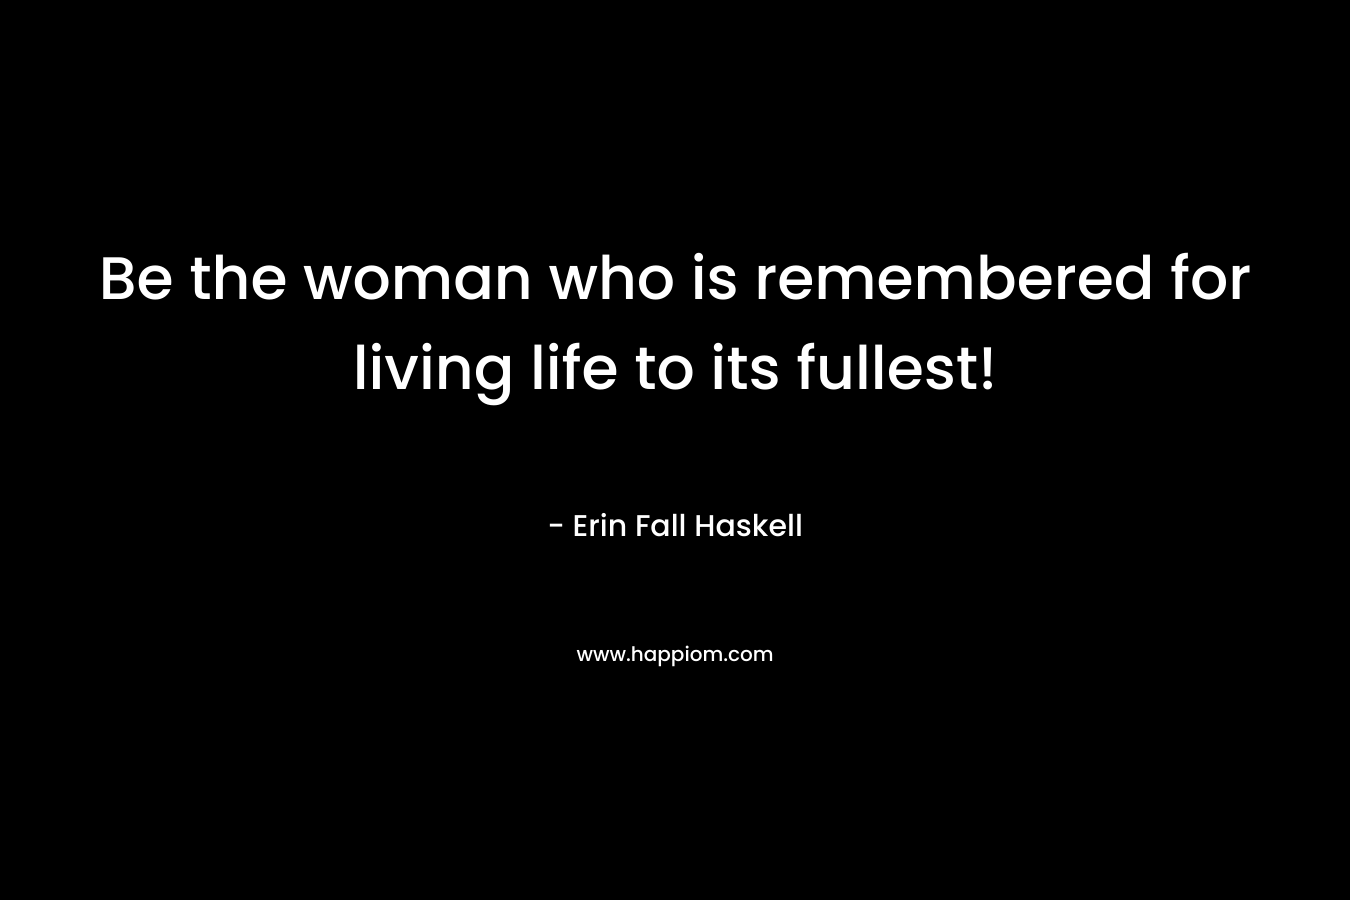 Be the woman who is remembered for living life to its fullest! – Erin Fall Haskell